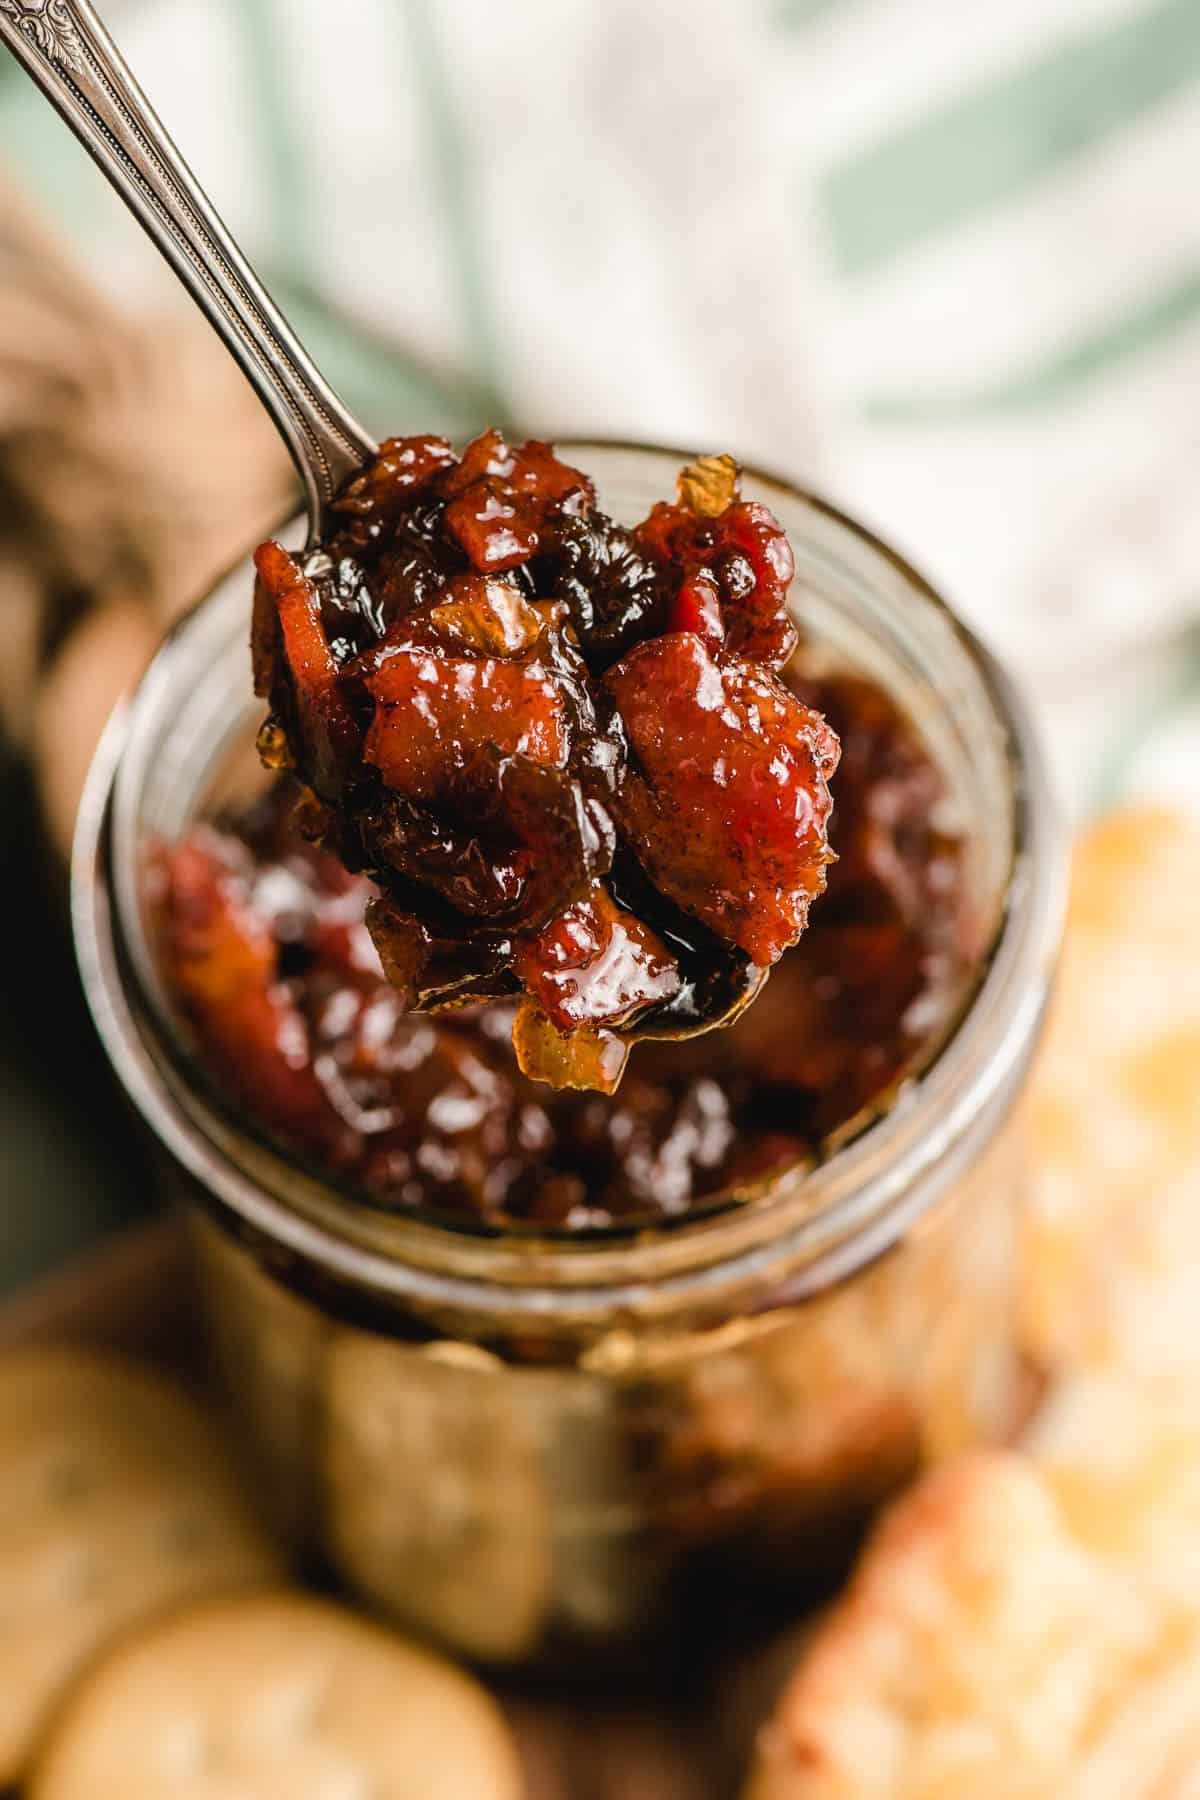 Spoon scooping salary onion jam out of a jar.